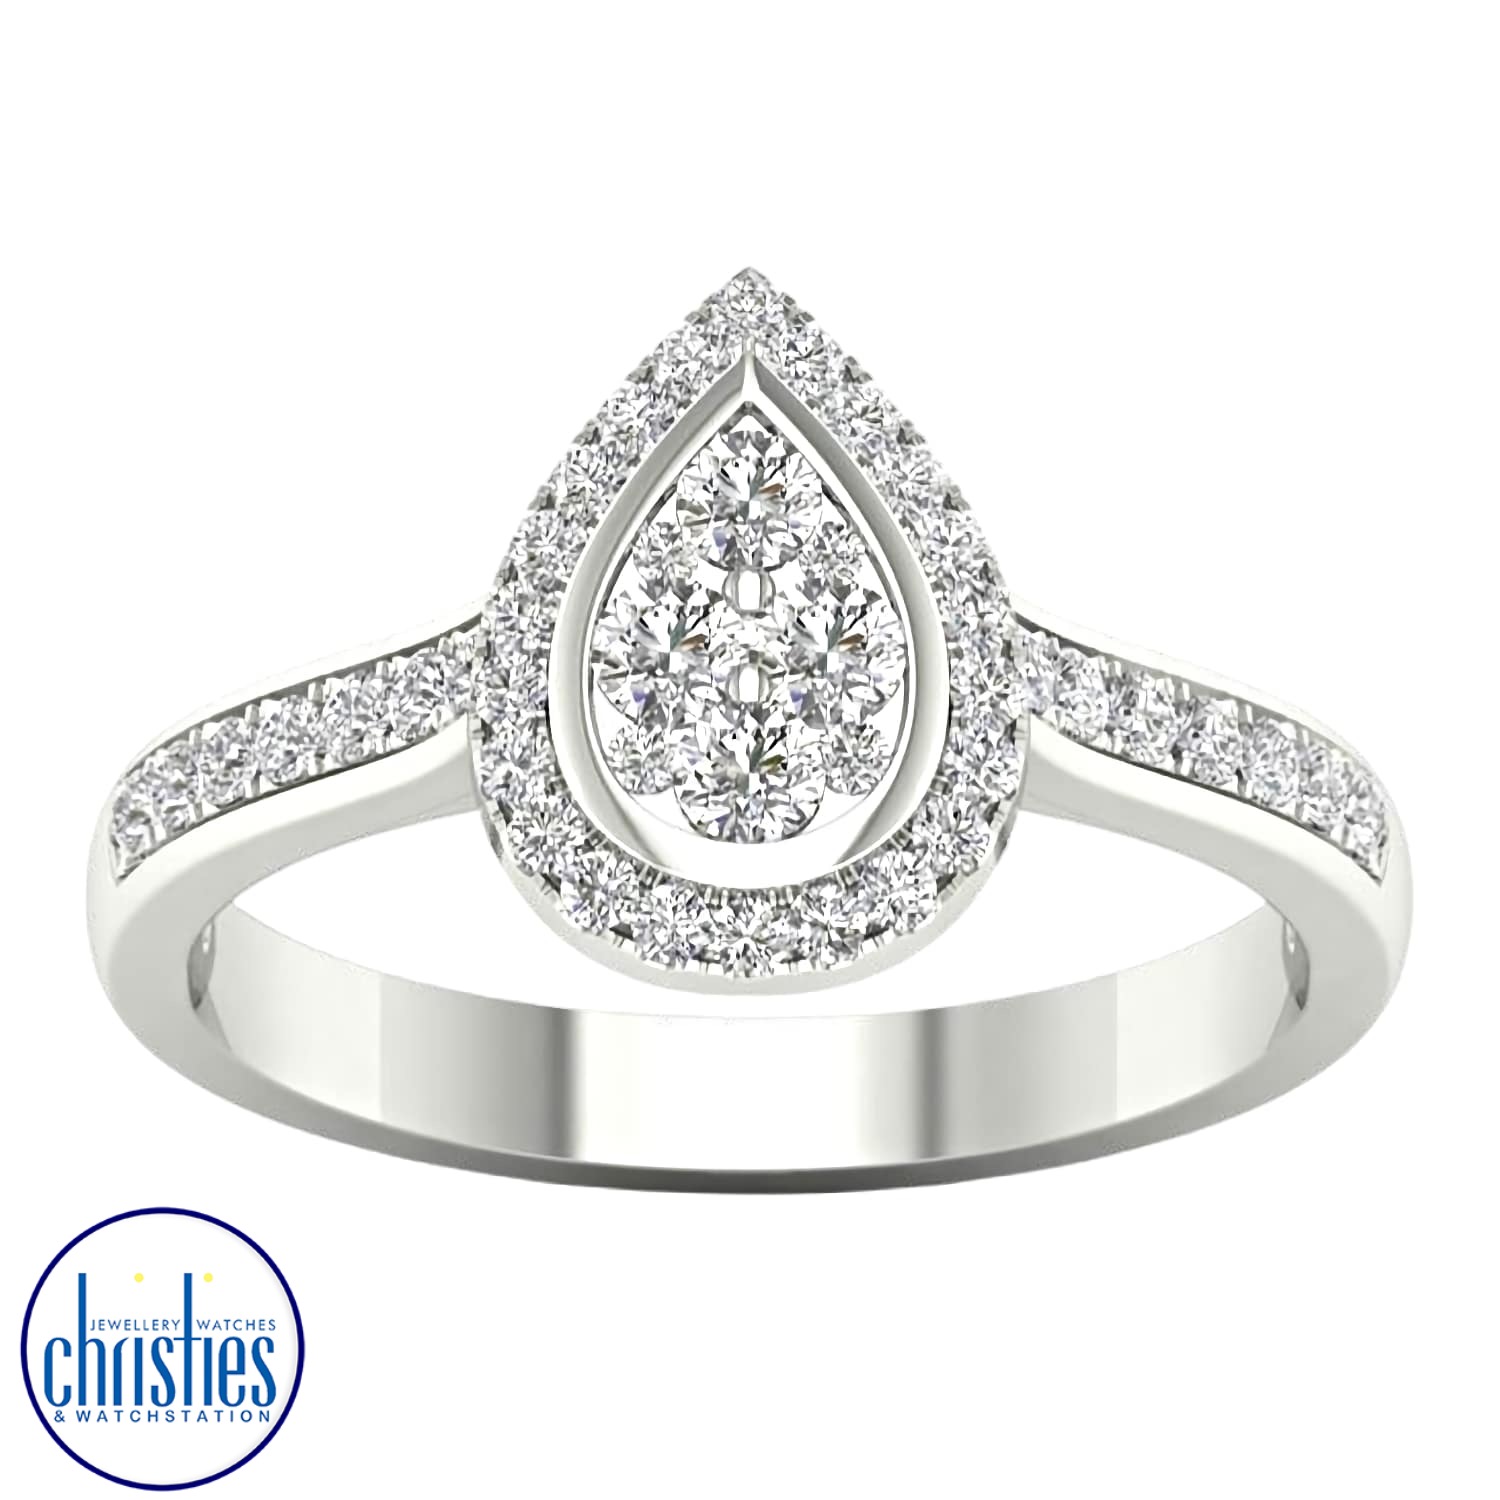 9ct White Gold Diamond Engagement Ring  0.50ct TDW RF17120.  Affordable Engagement Rings Nz $1,995.00